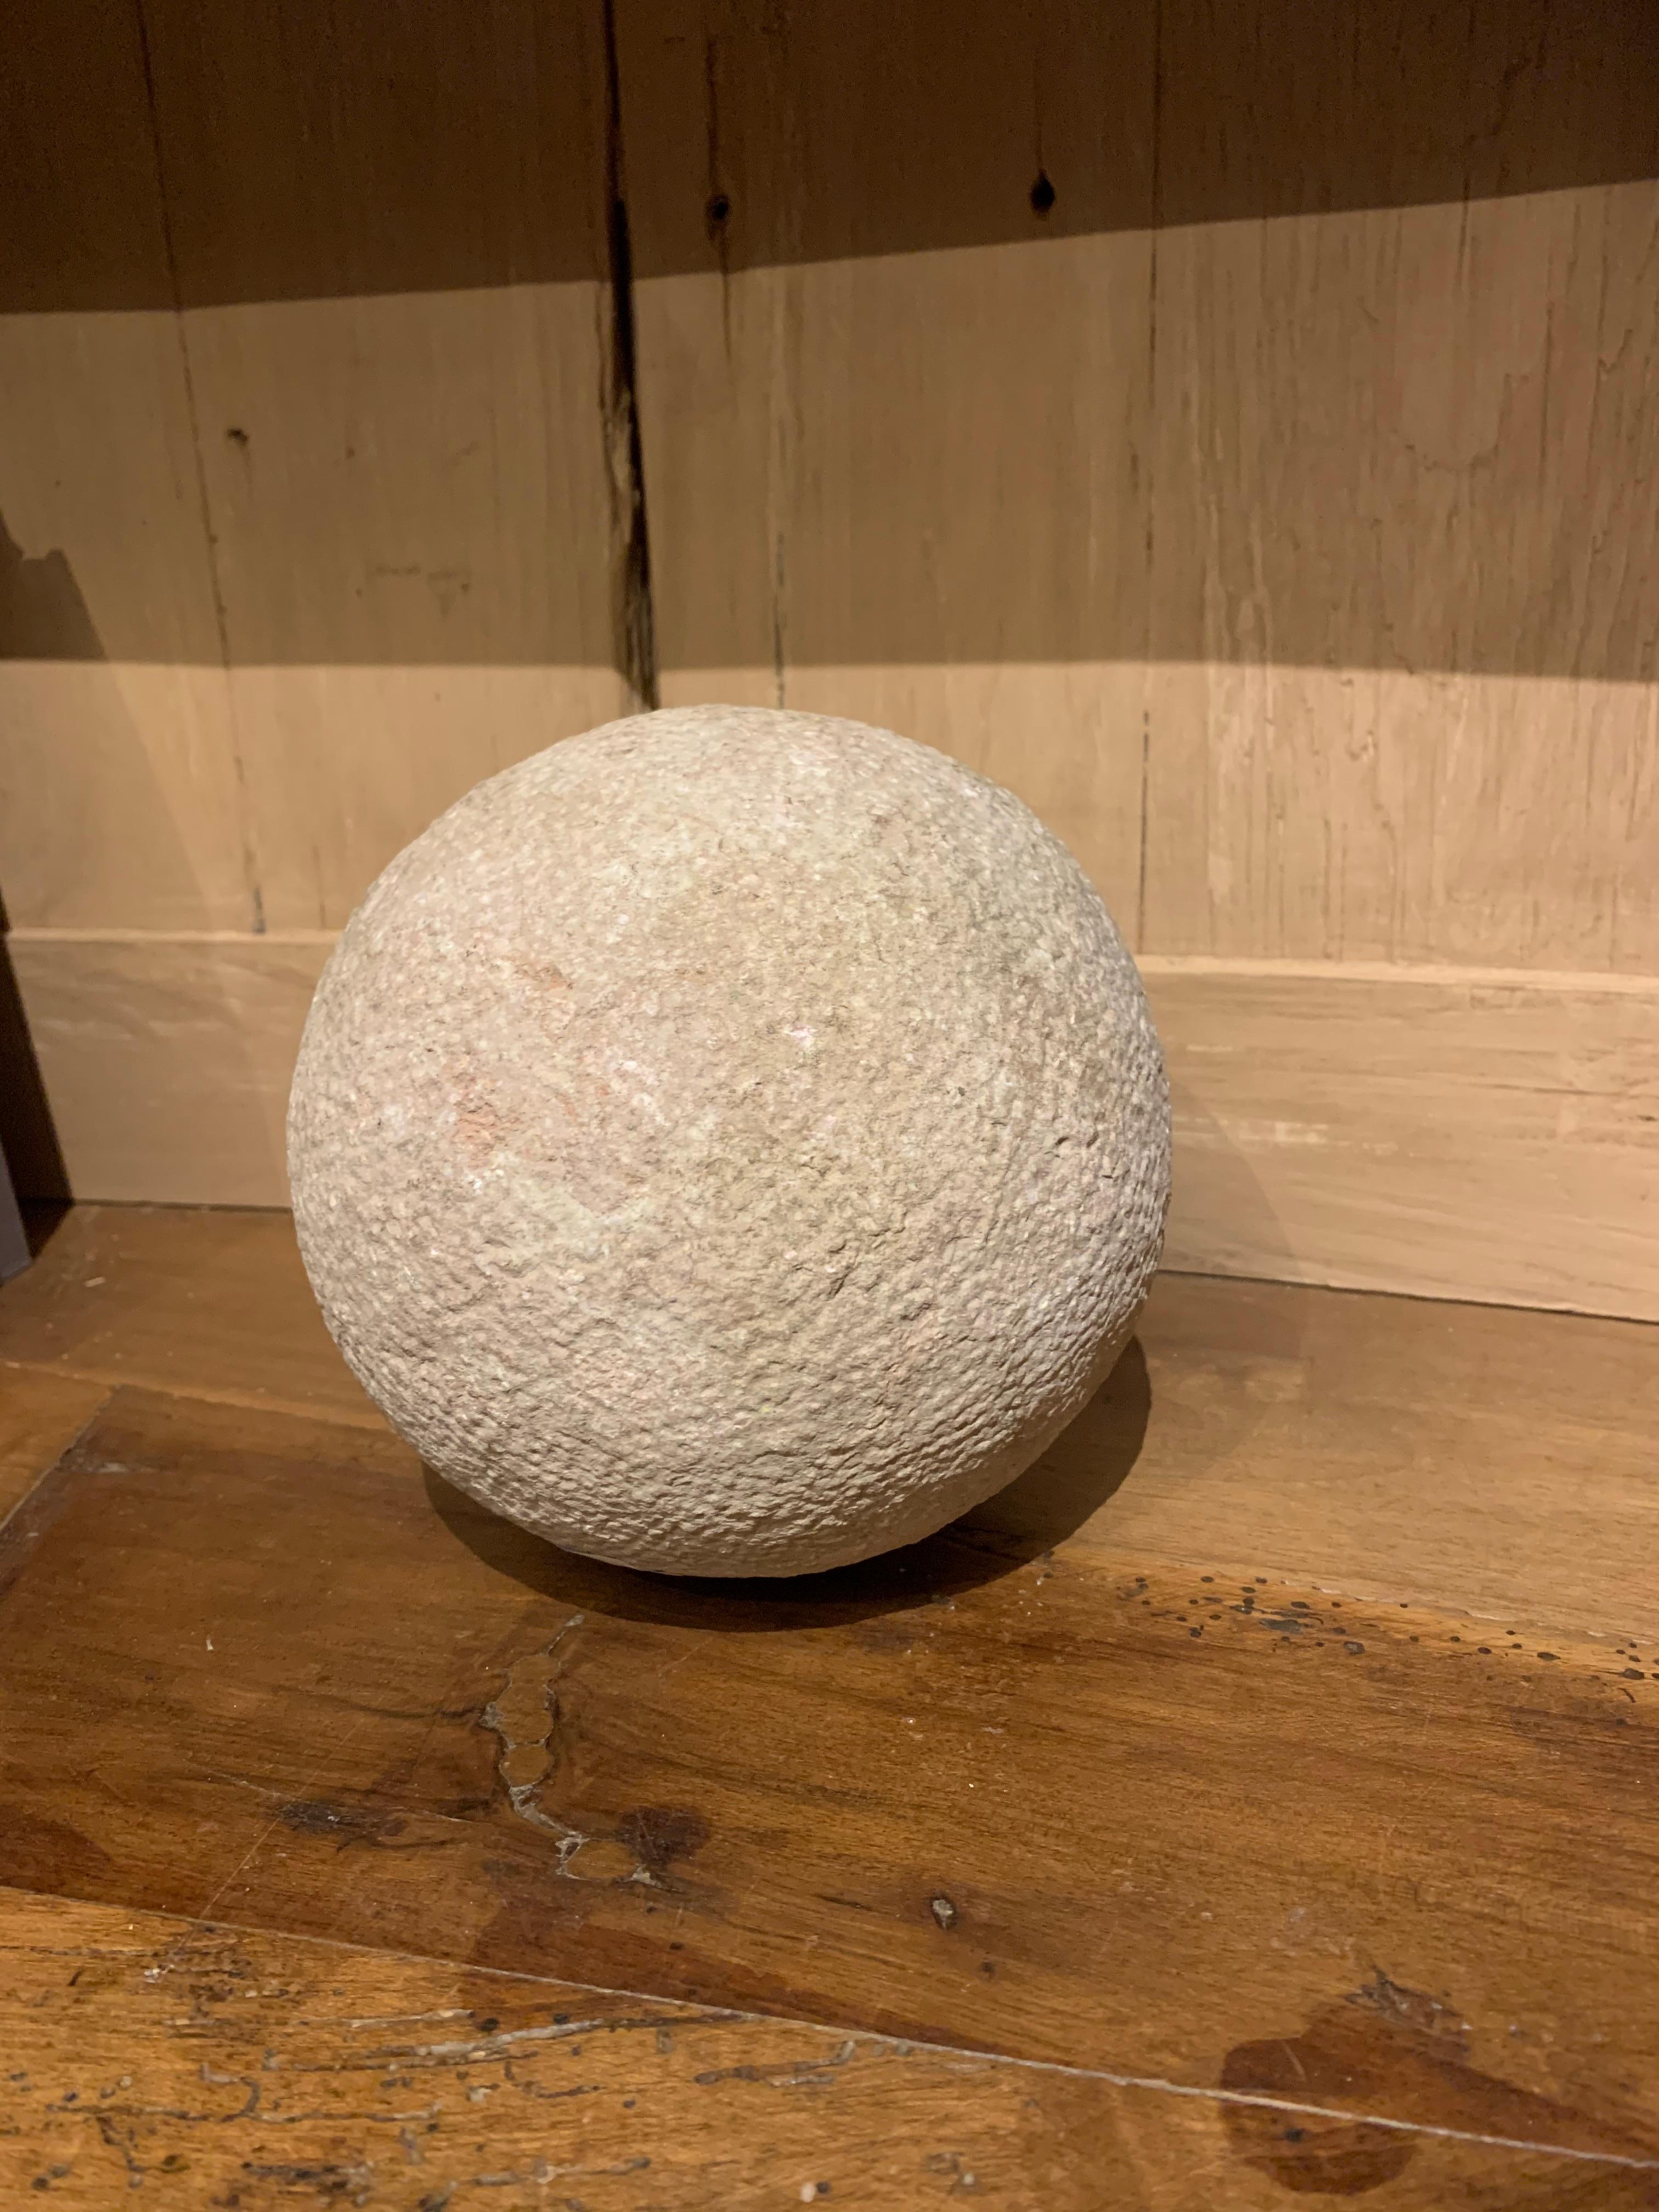 A 19th century French sandstone sphere. The surface finished in so called 'Bouchardé' with old marks and some corrosion stains. Overall nice patina.
Spheres like this were often made by apprentice stonecutters as a exercise and sold as garden- or